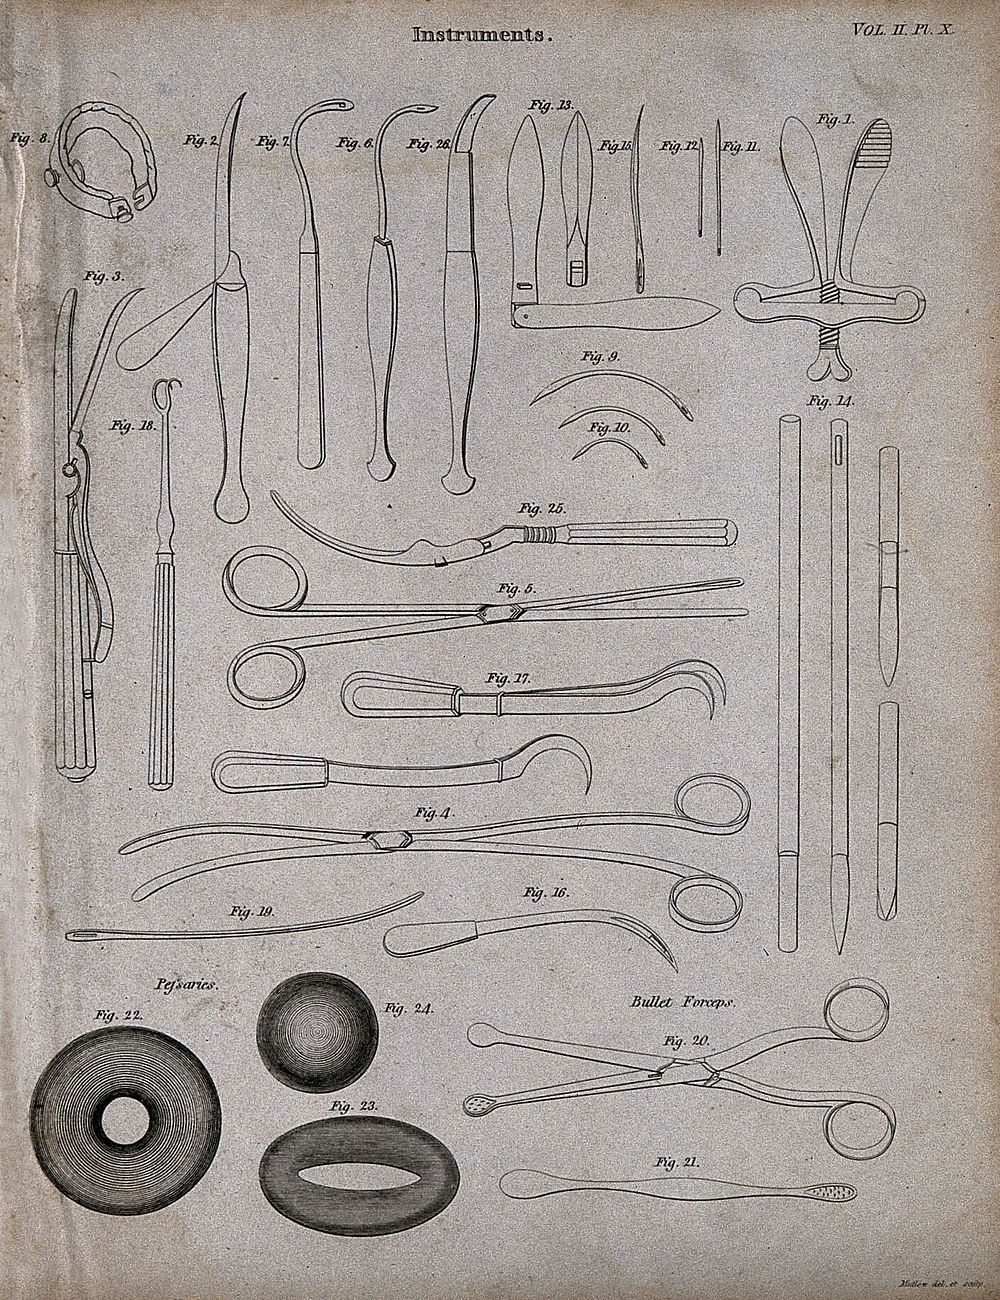 Surgical instruments. Engraving by Mutlow.